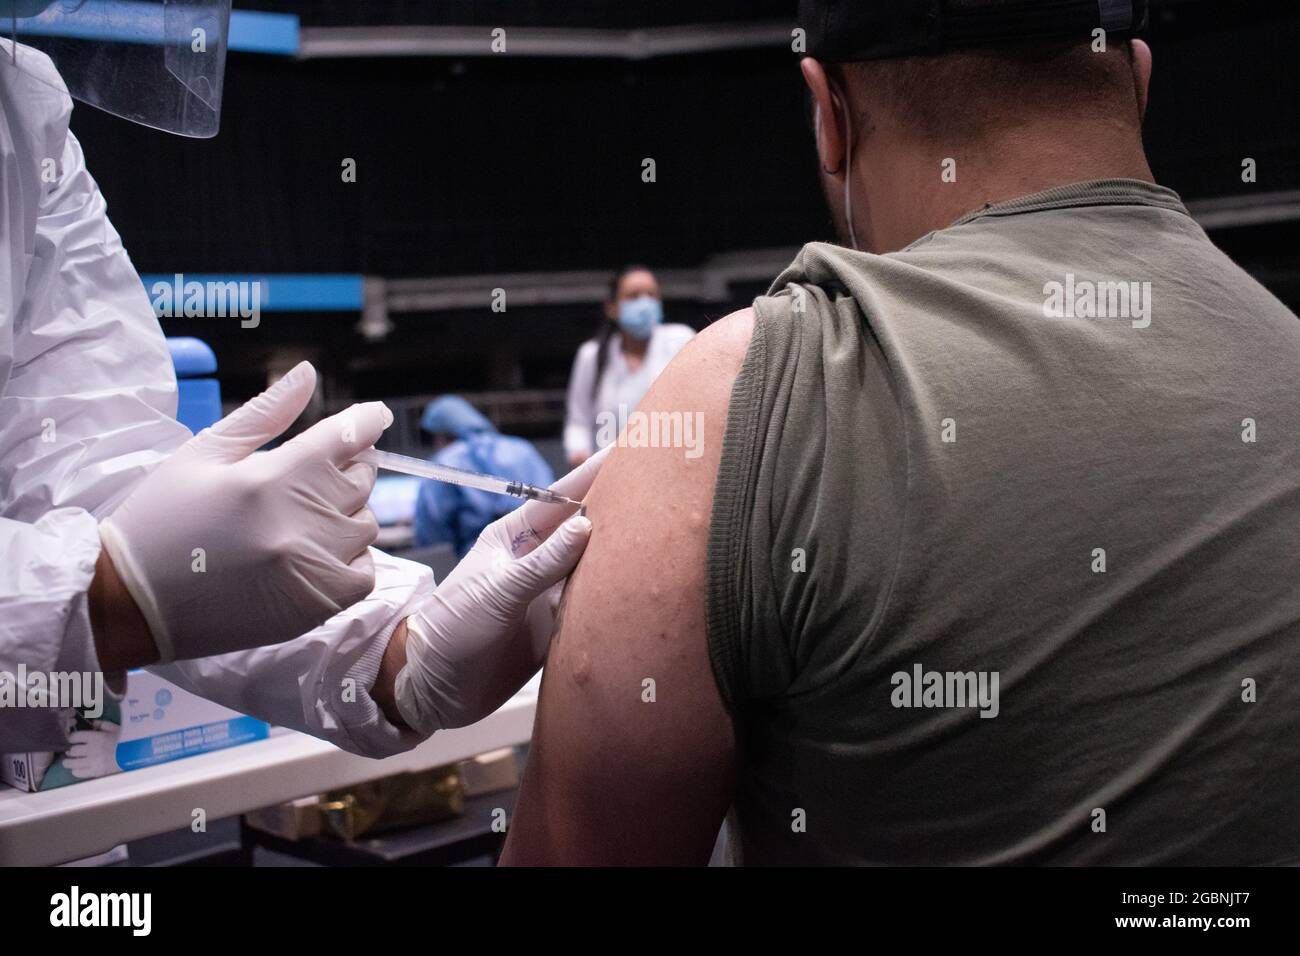 People from ages 25 to 30 start their vaccination phase with the Moderna novel COVID-19 vaccine against the Coronavirus disease in Bogota, Colombia on August 3, 2021. Stock Photo